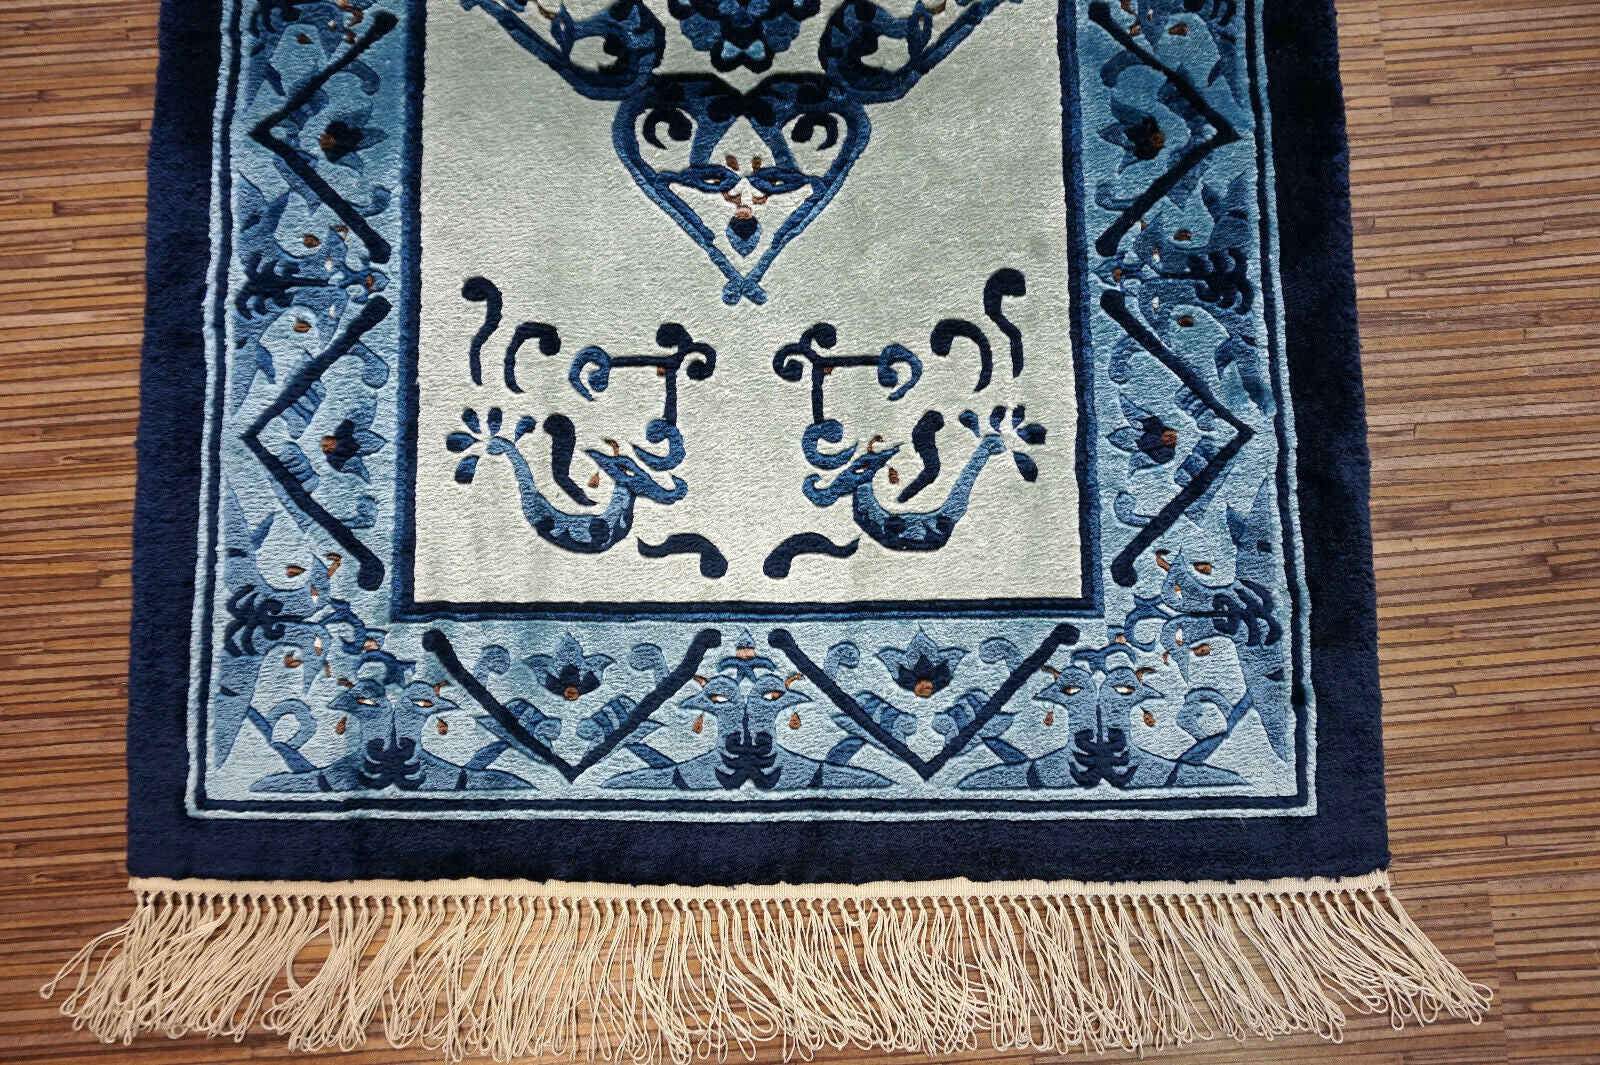 Handmade vintage Art Deco Chinese rug made in silk with birds design. The rug is in sea green and bright blue shades. It is from the end of 20th century in original good condition.